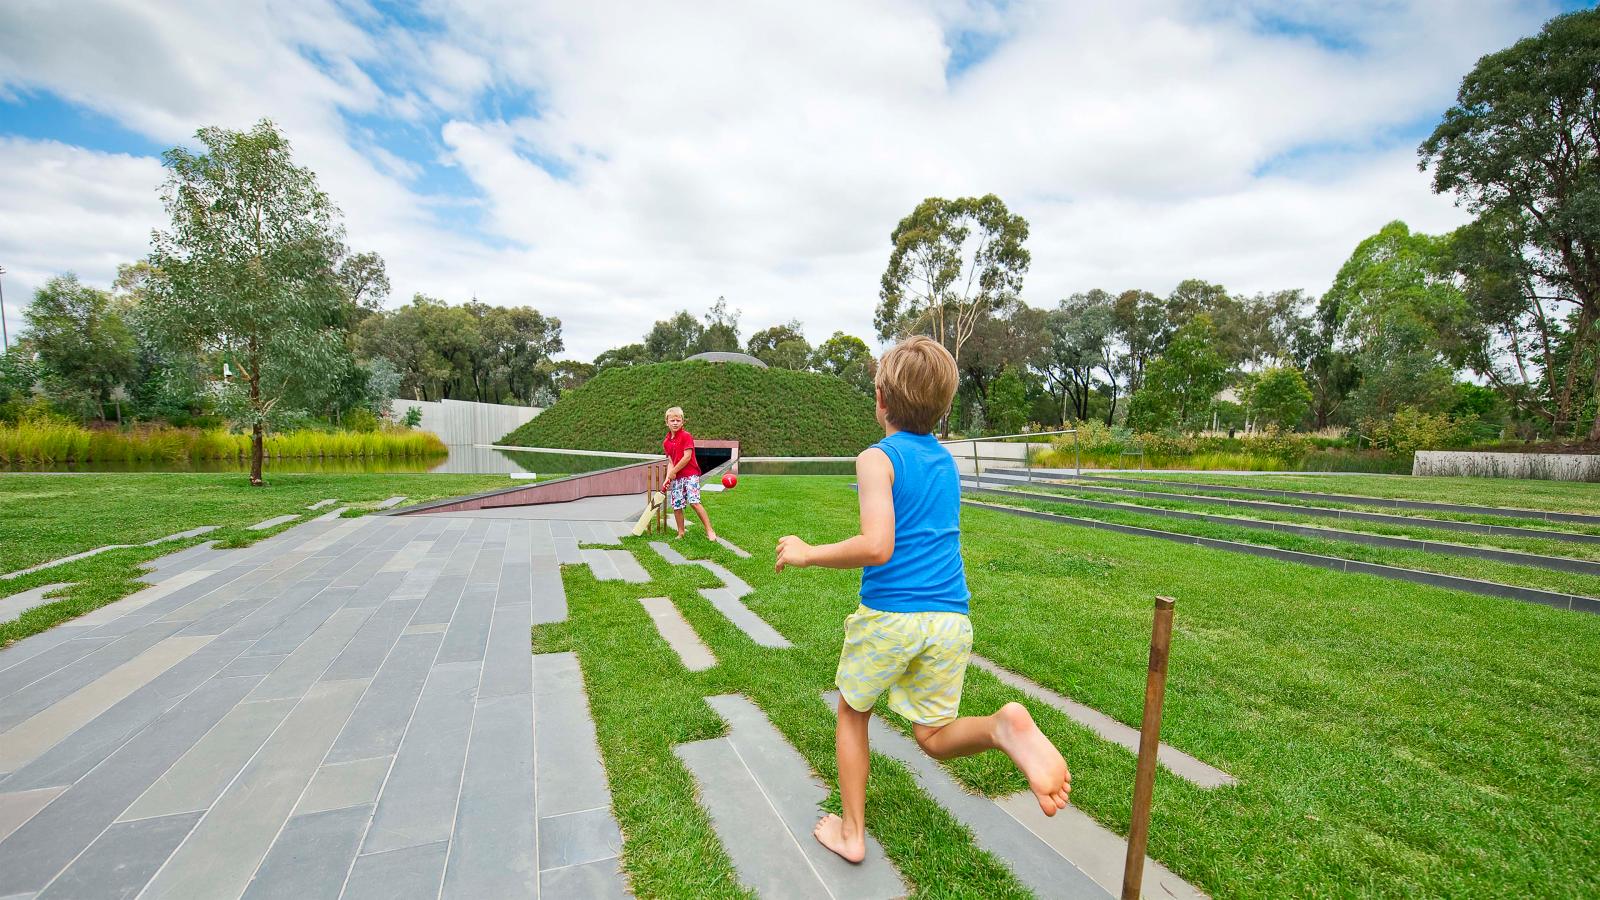 Two children play joyfully near a sidewalk in the spacious Australian Garden. One child, wearing a red shirt, looks ready to catch or throw a ball, while the other child, in a blue shirt, runs barefoot on the grass. The lush park features manicured lawns, trees, and a large bushy mound near the NGA.